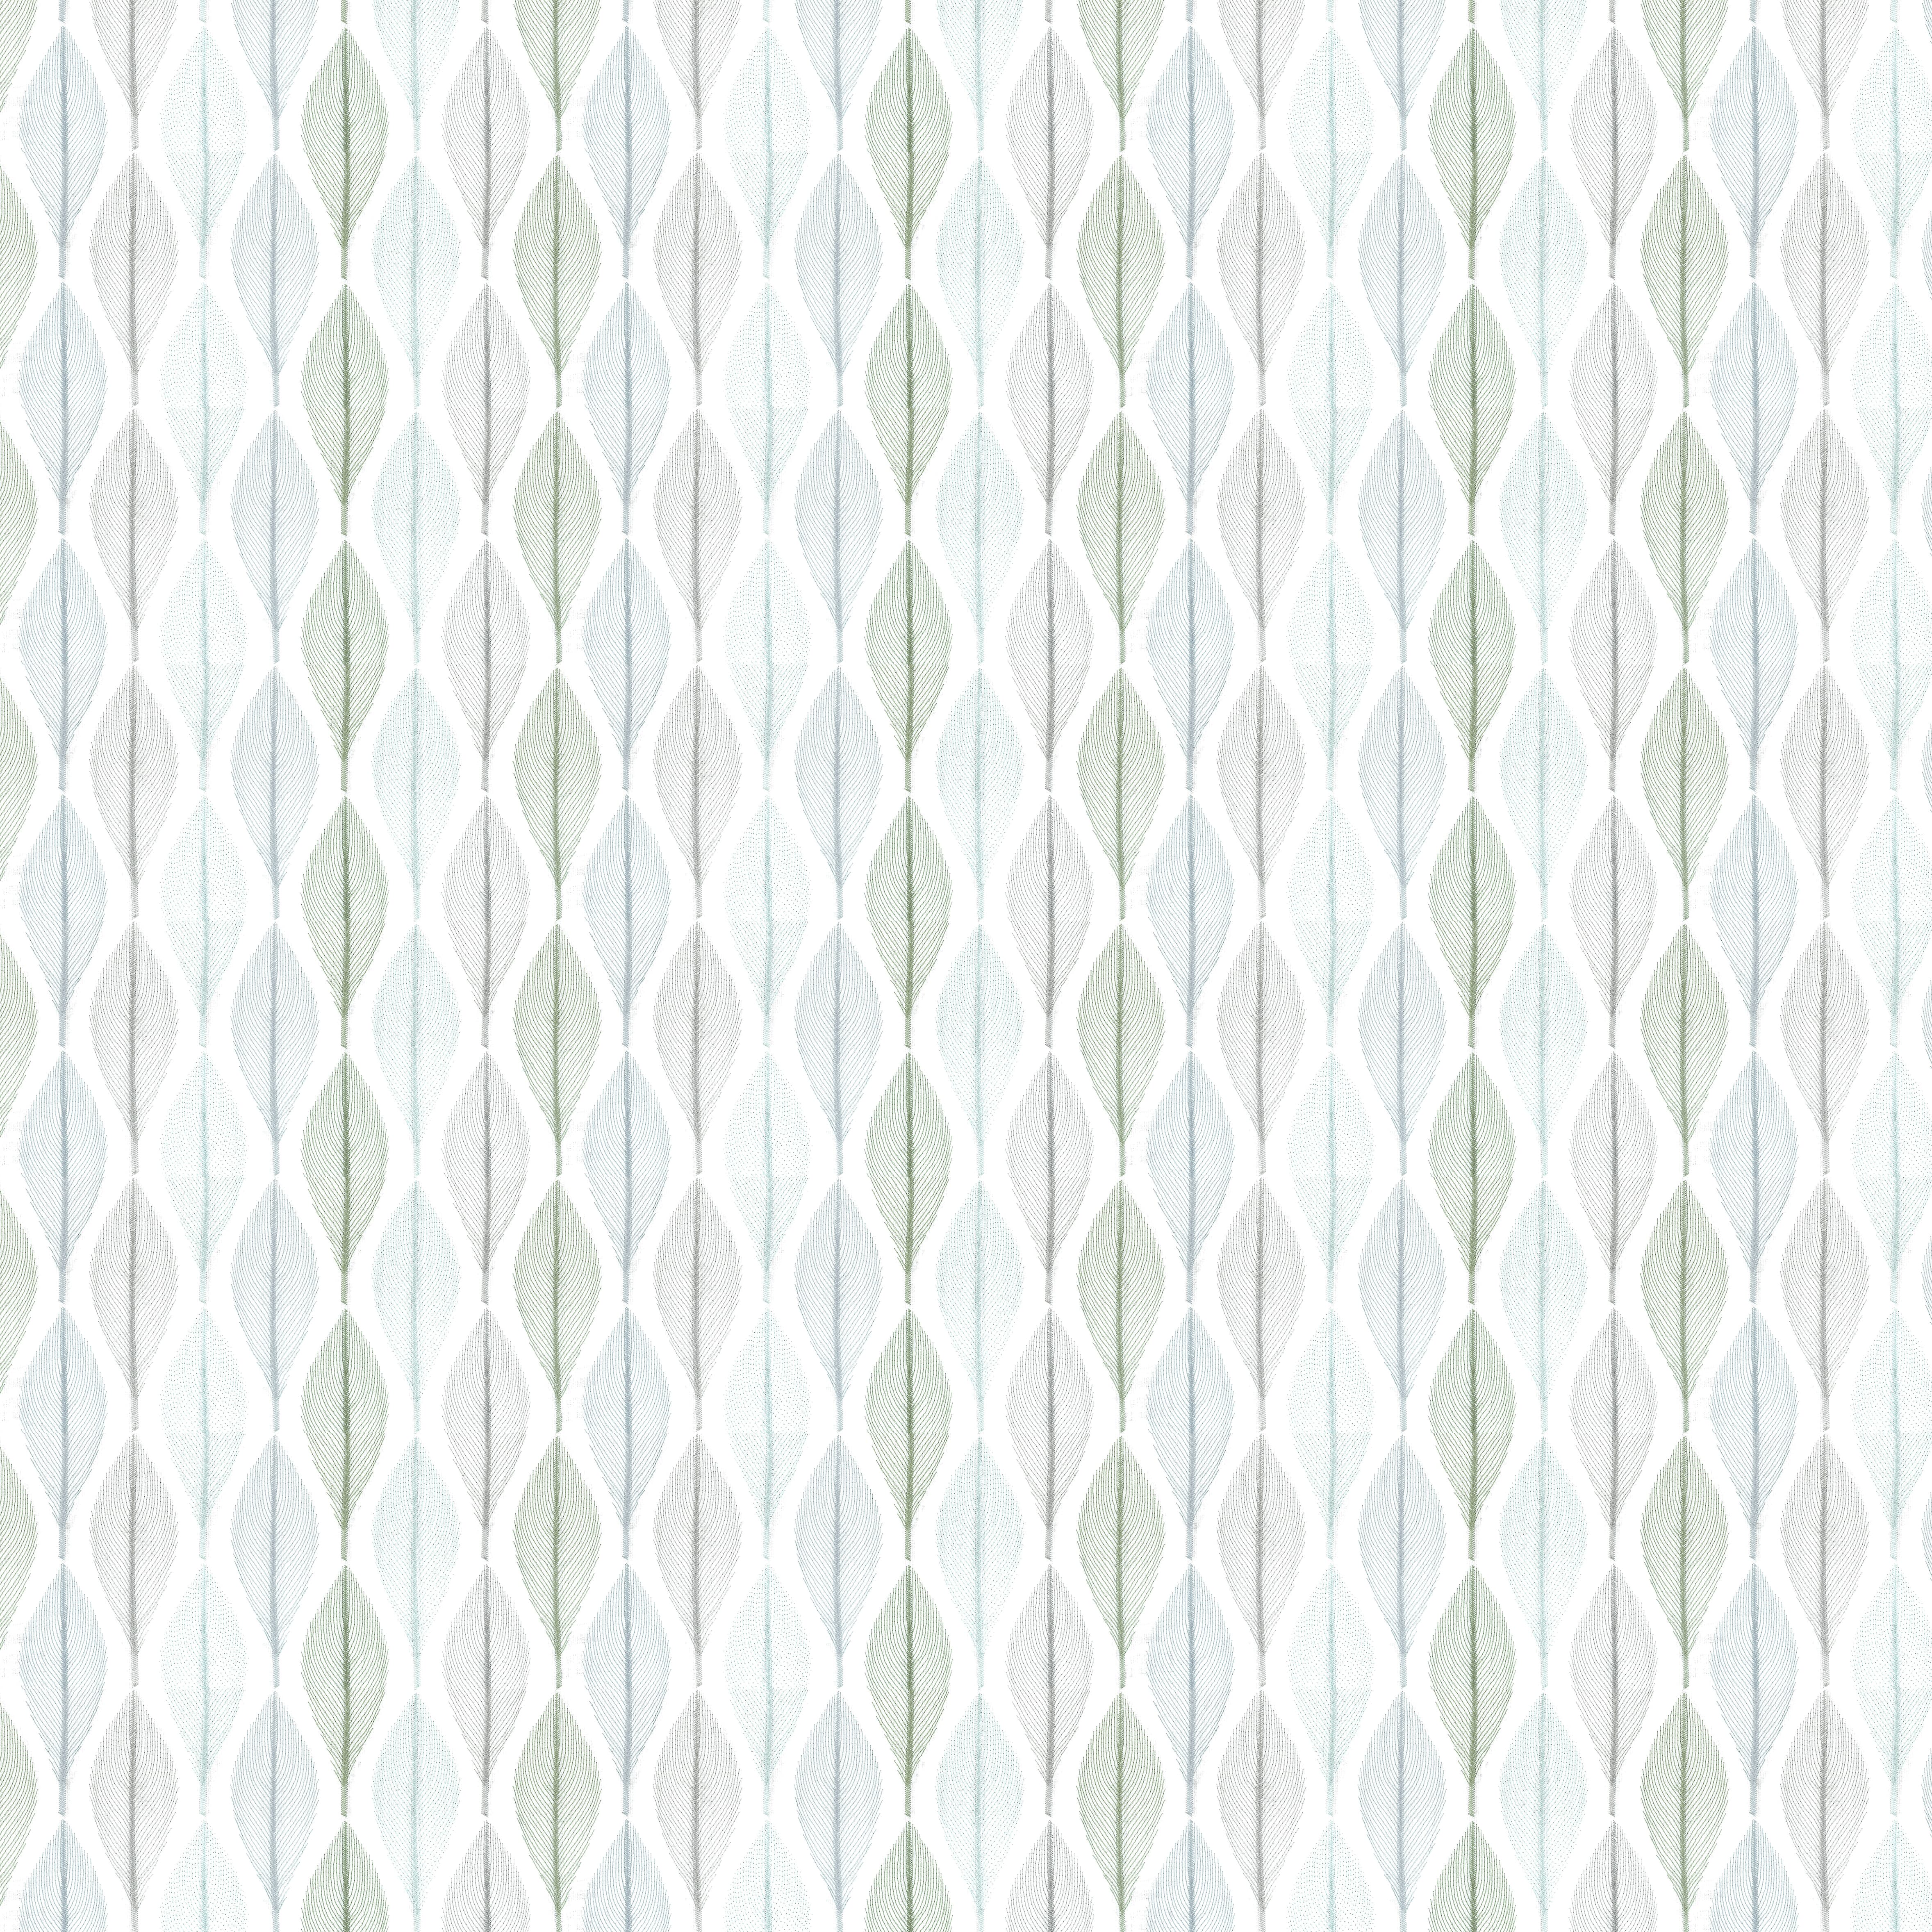 Culverson 1 Seamist by Stout Fabric